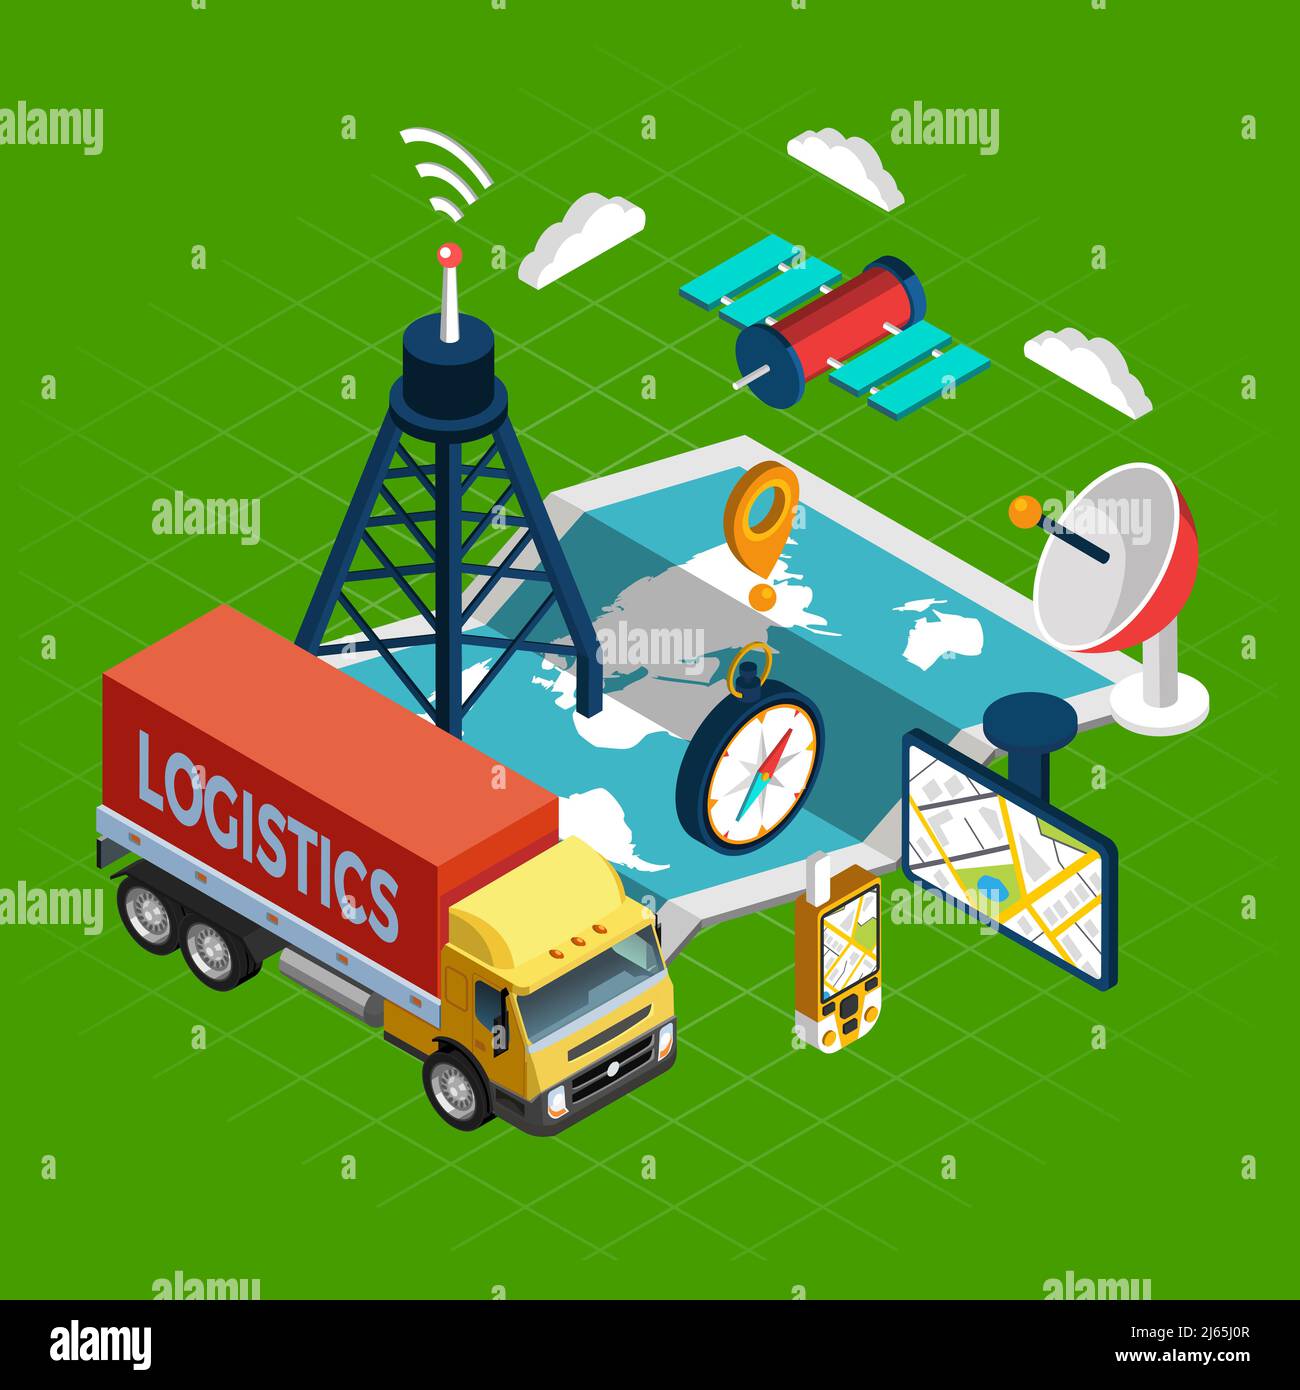 Navigation concept with logistics and satellite symbols on green background isometric vector illustration Stock Vector